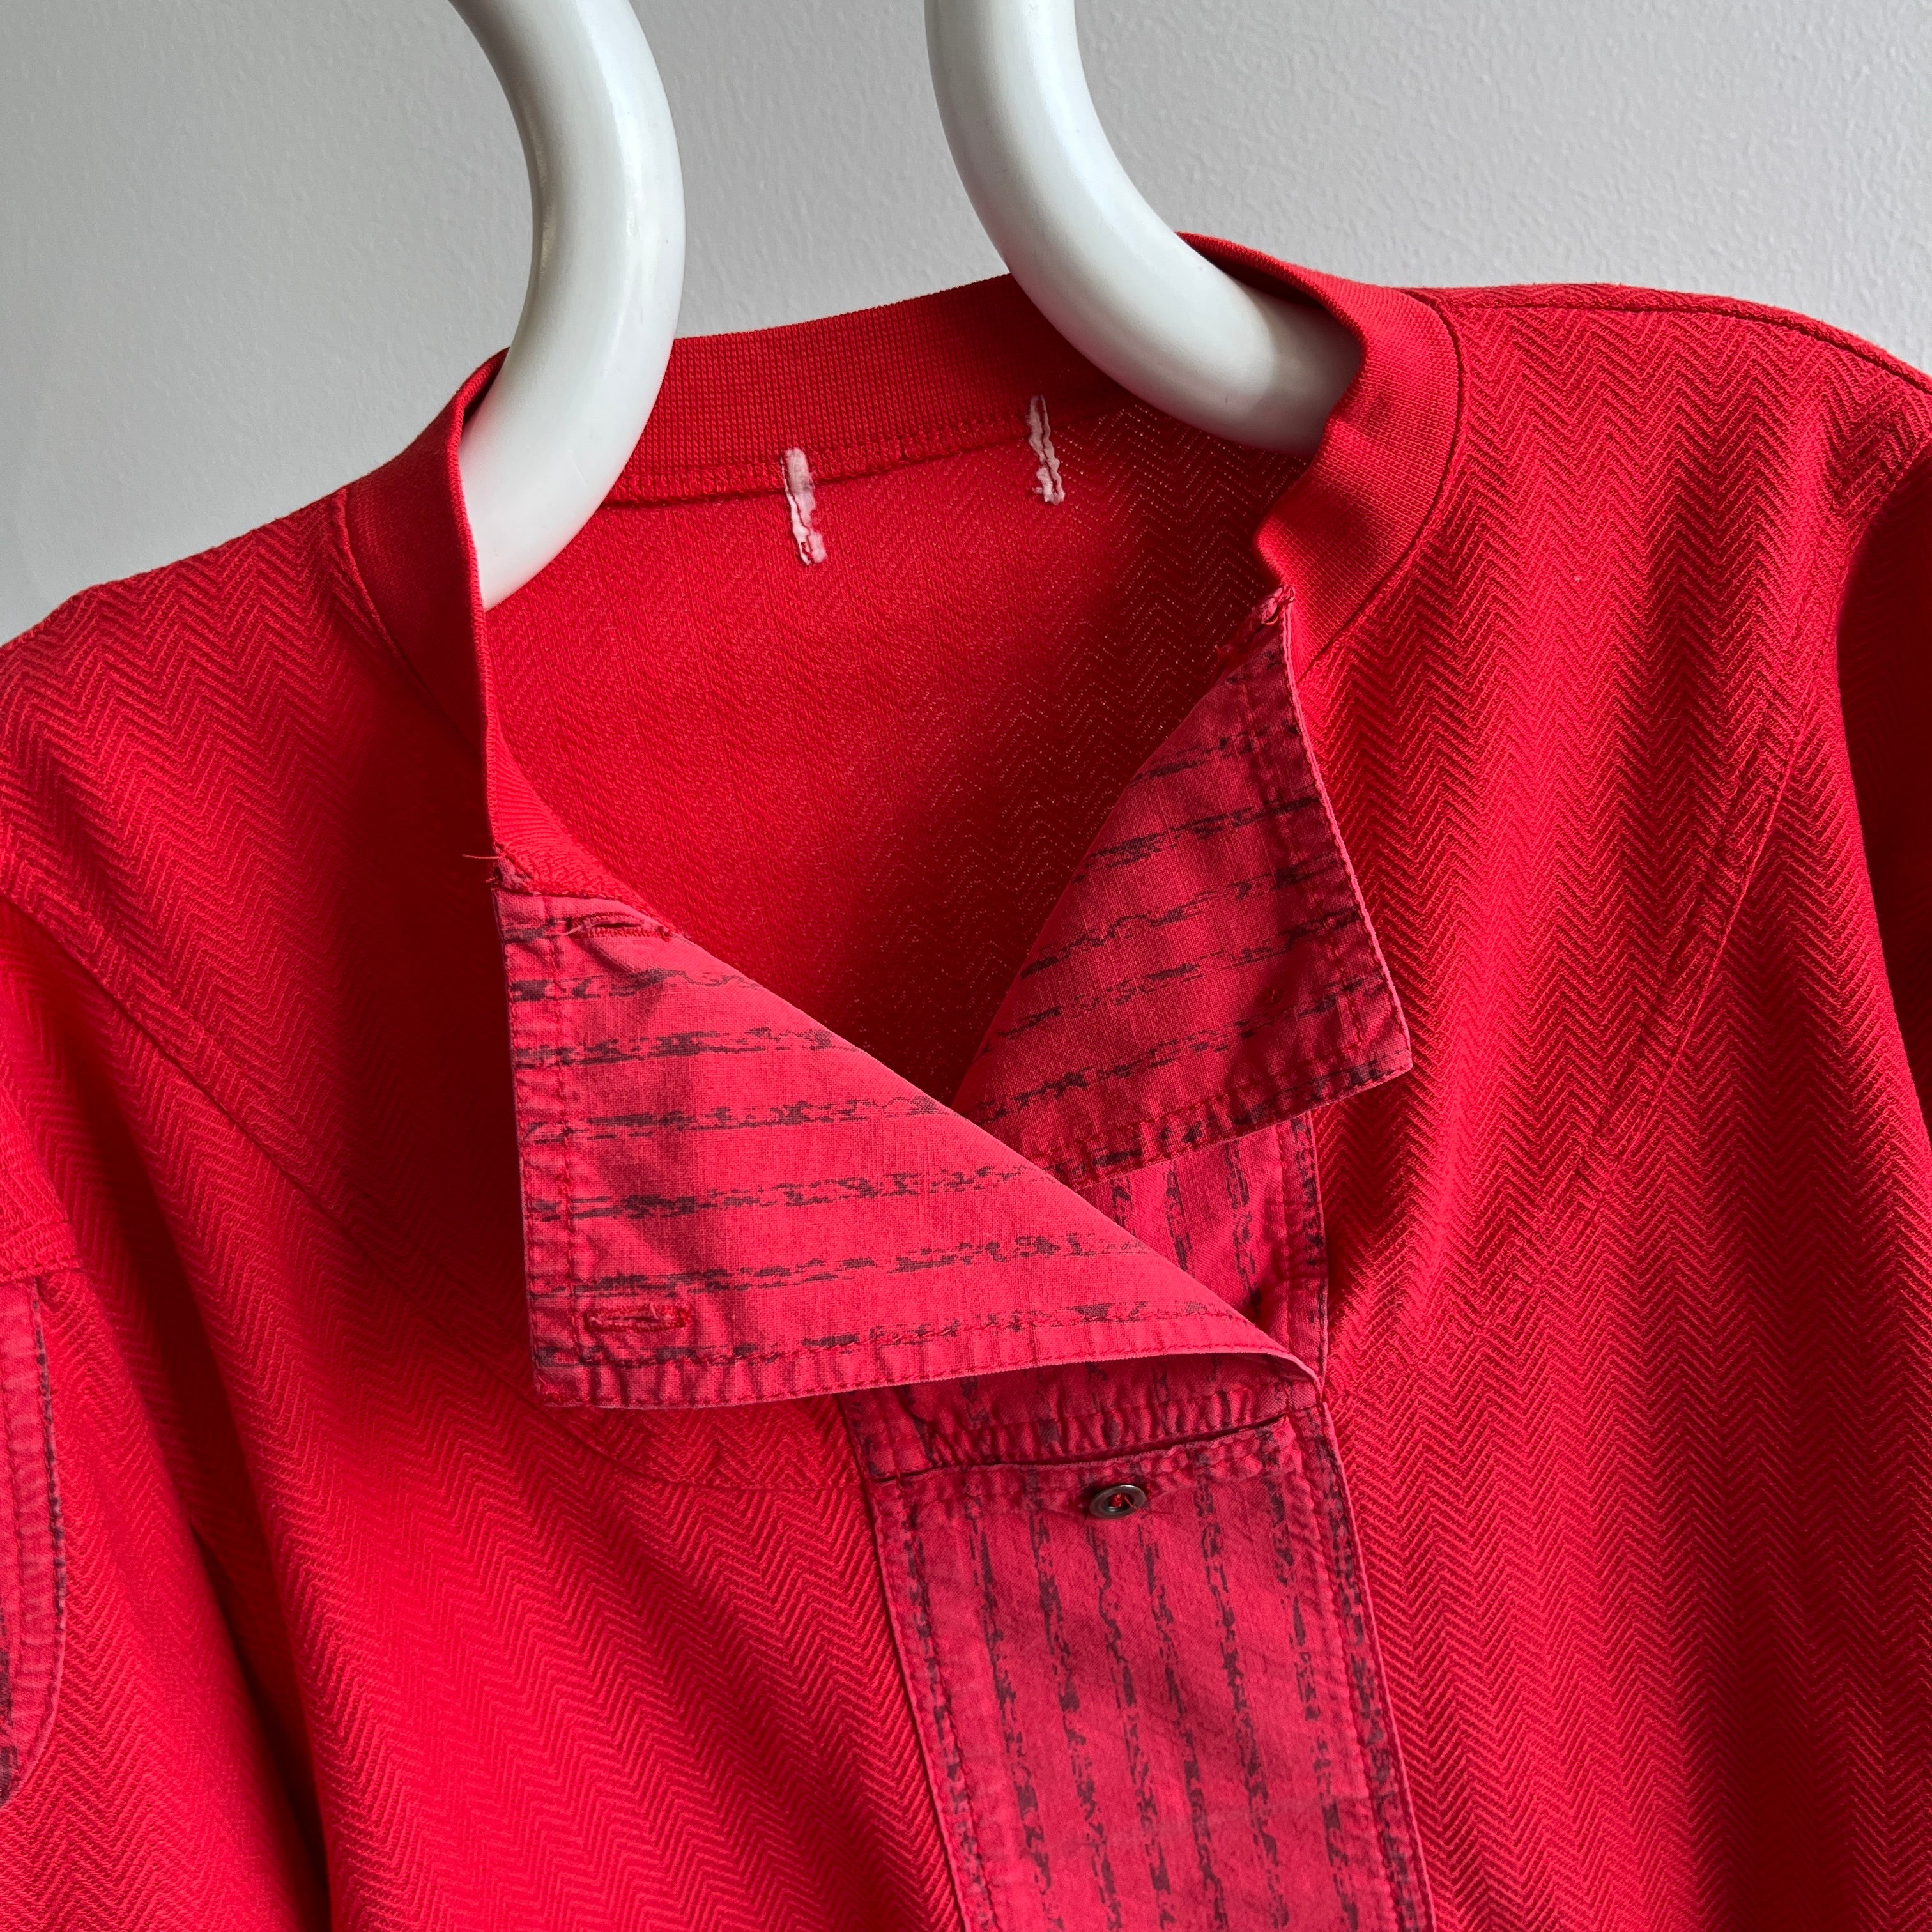 1980s Chevron Striped Double Chested Buttoned Super Cool Red Sweatshirt